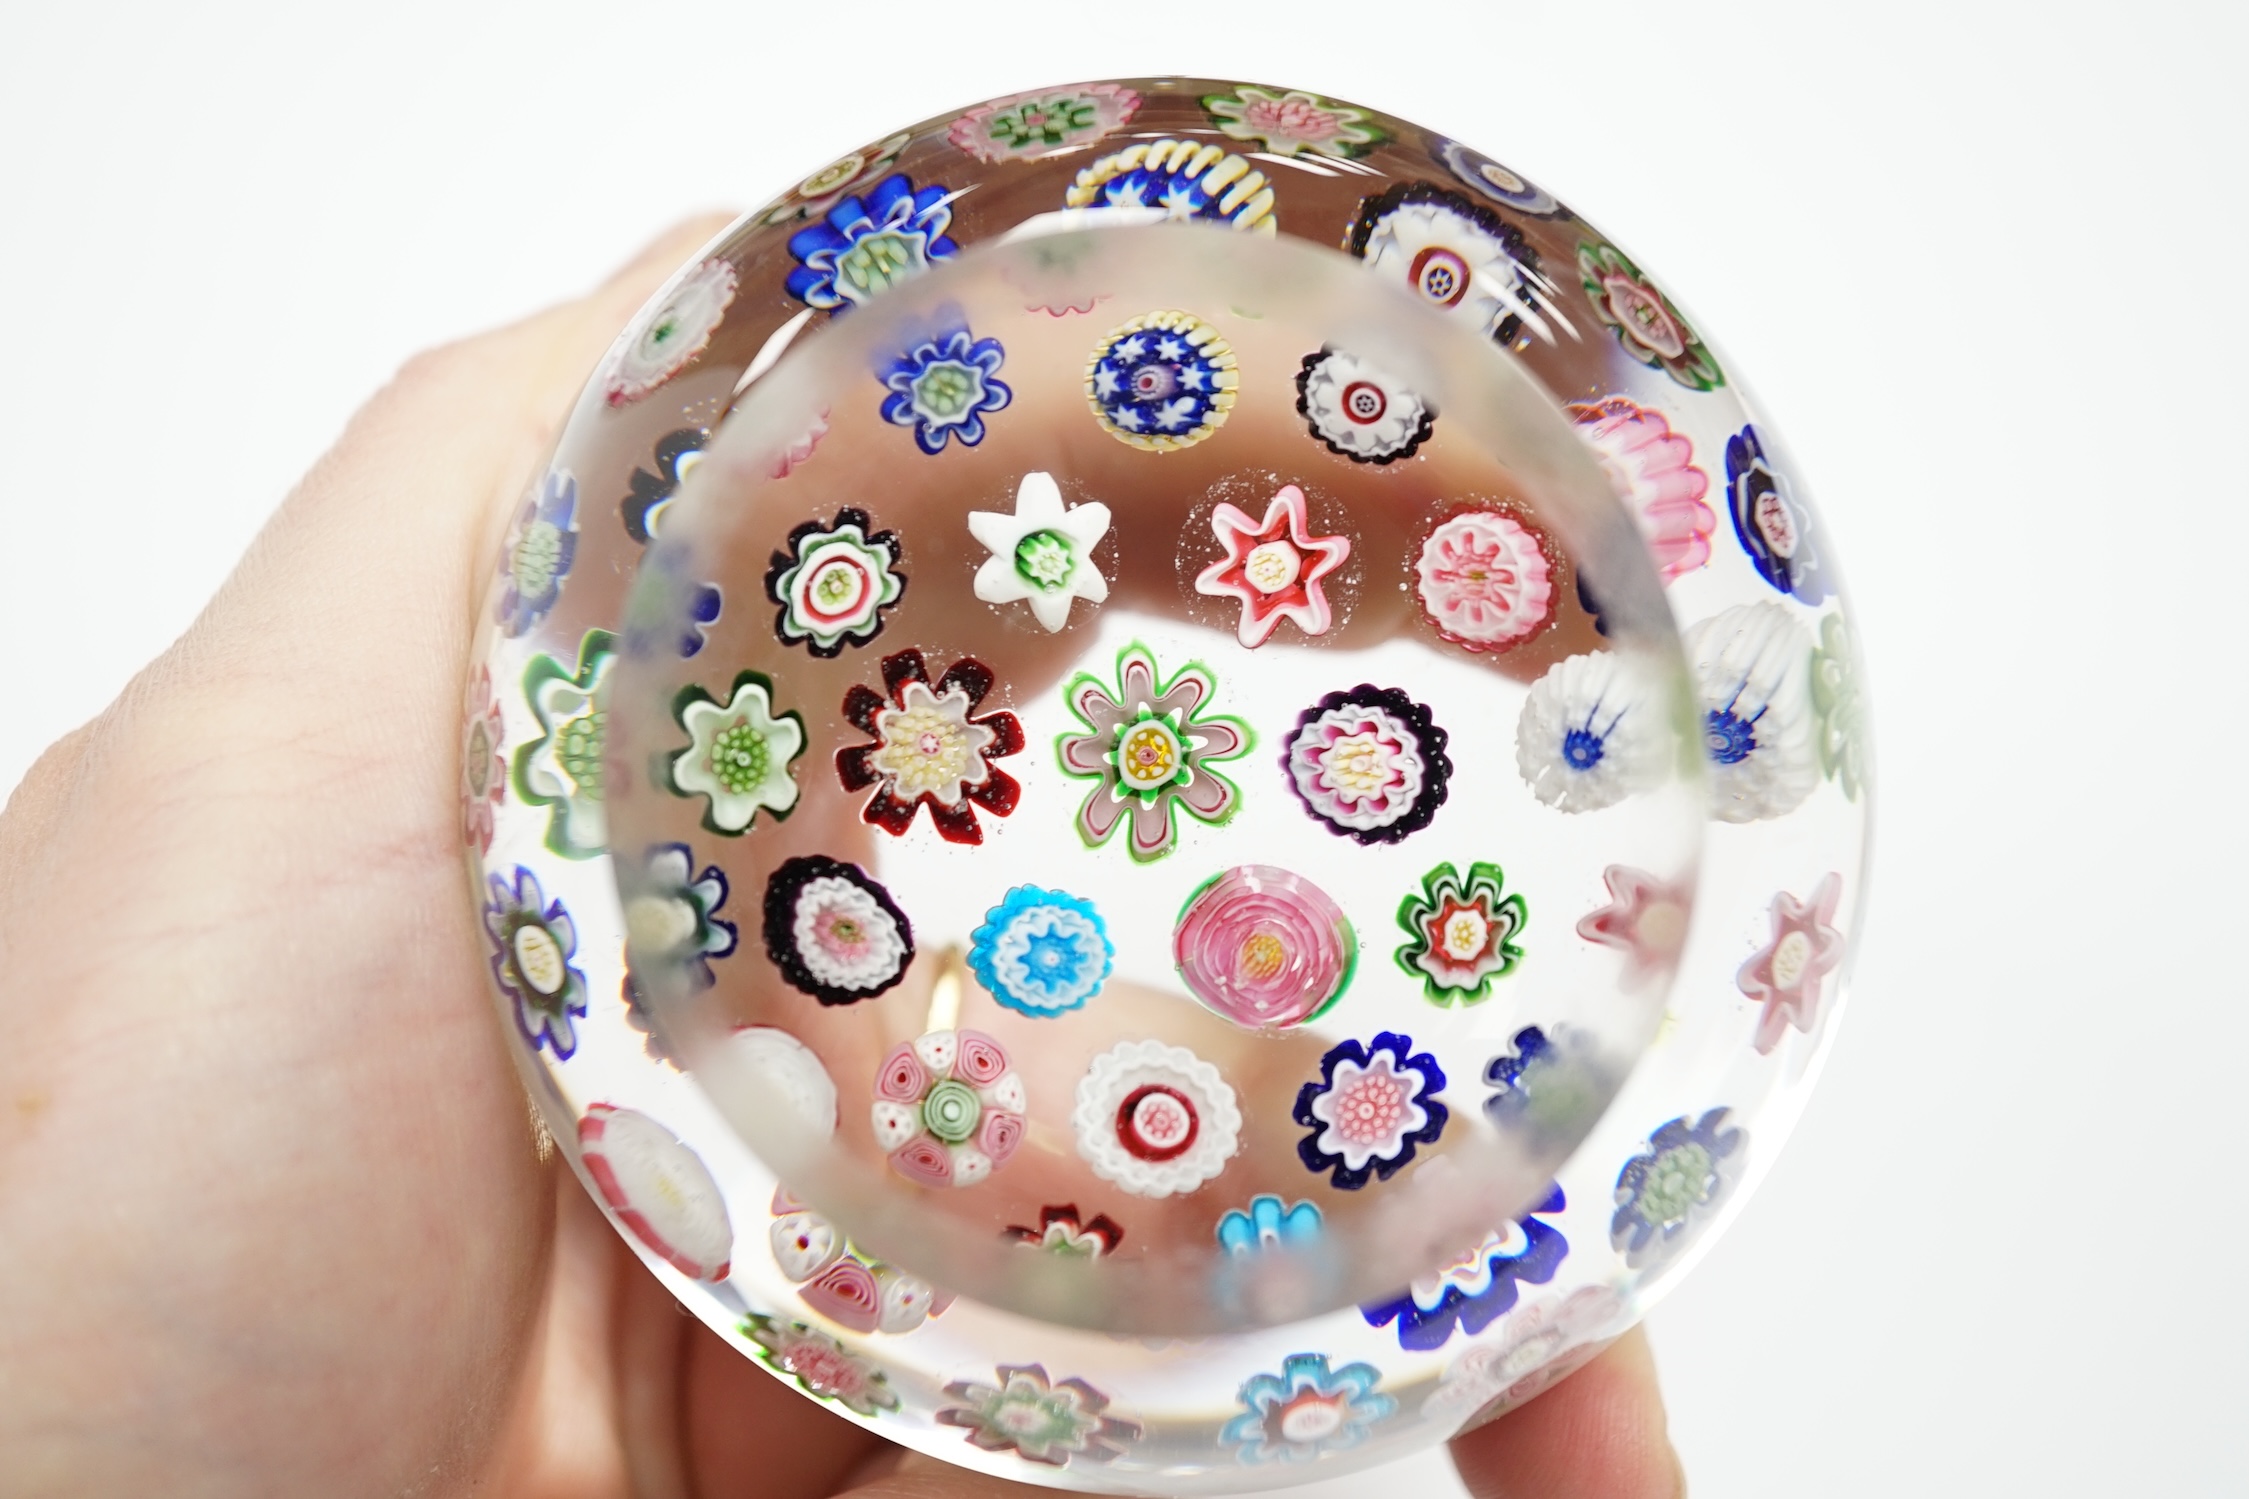 A Clichy glass roses paperweight, 8cm in diameter - Image 4 of 4